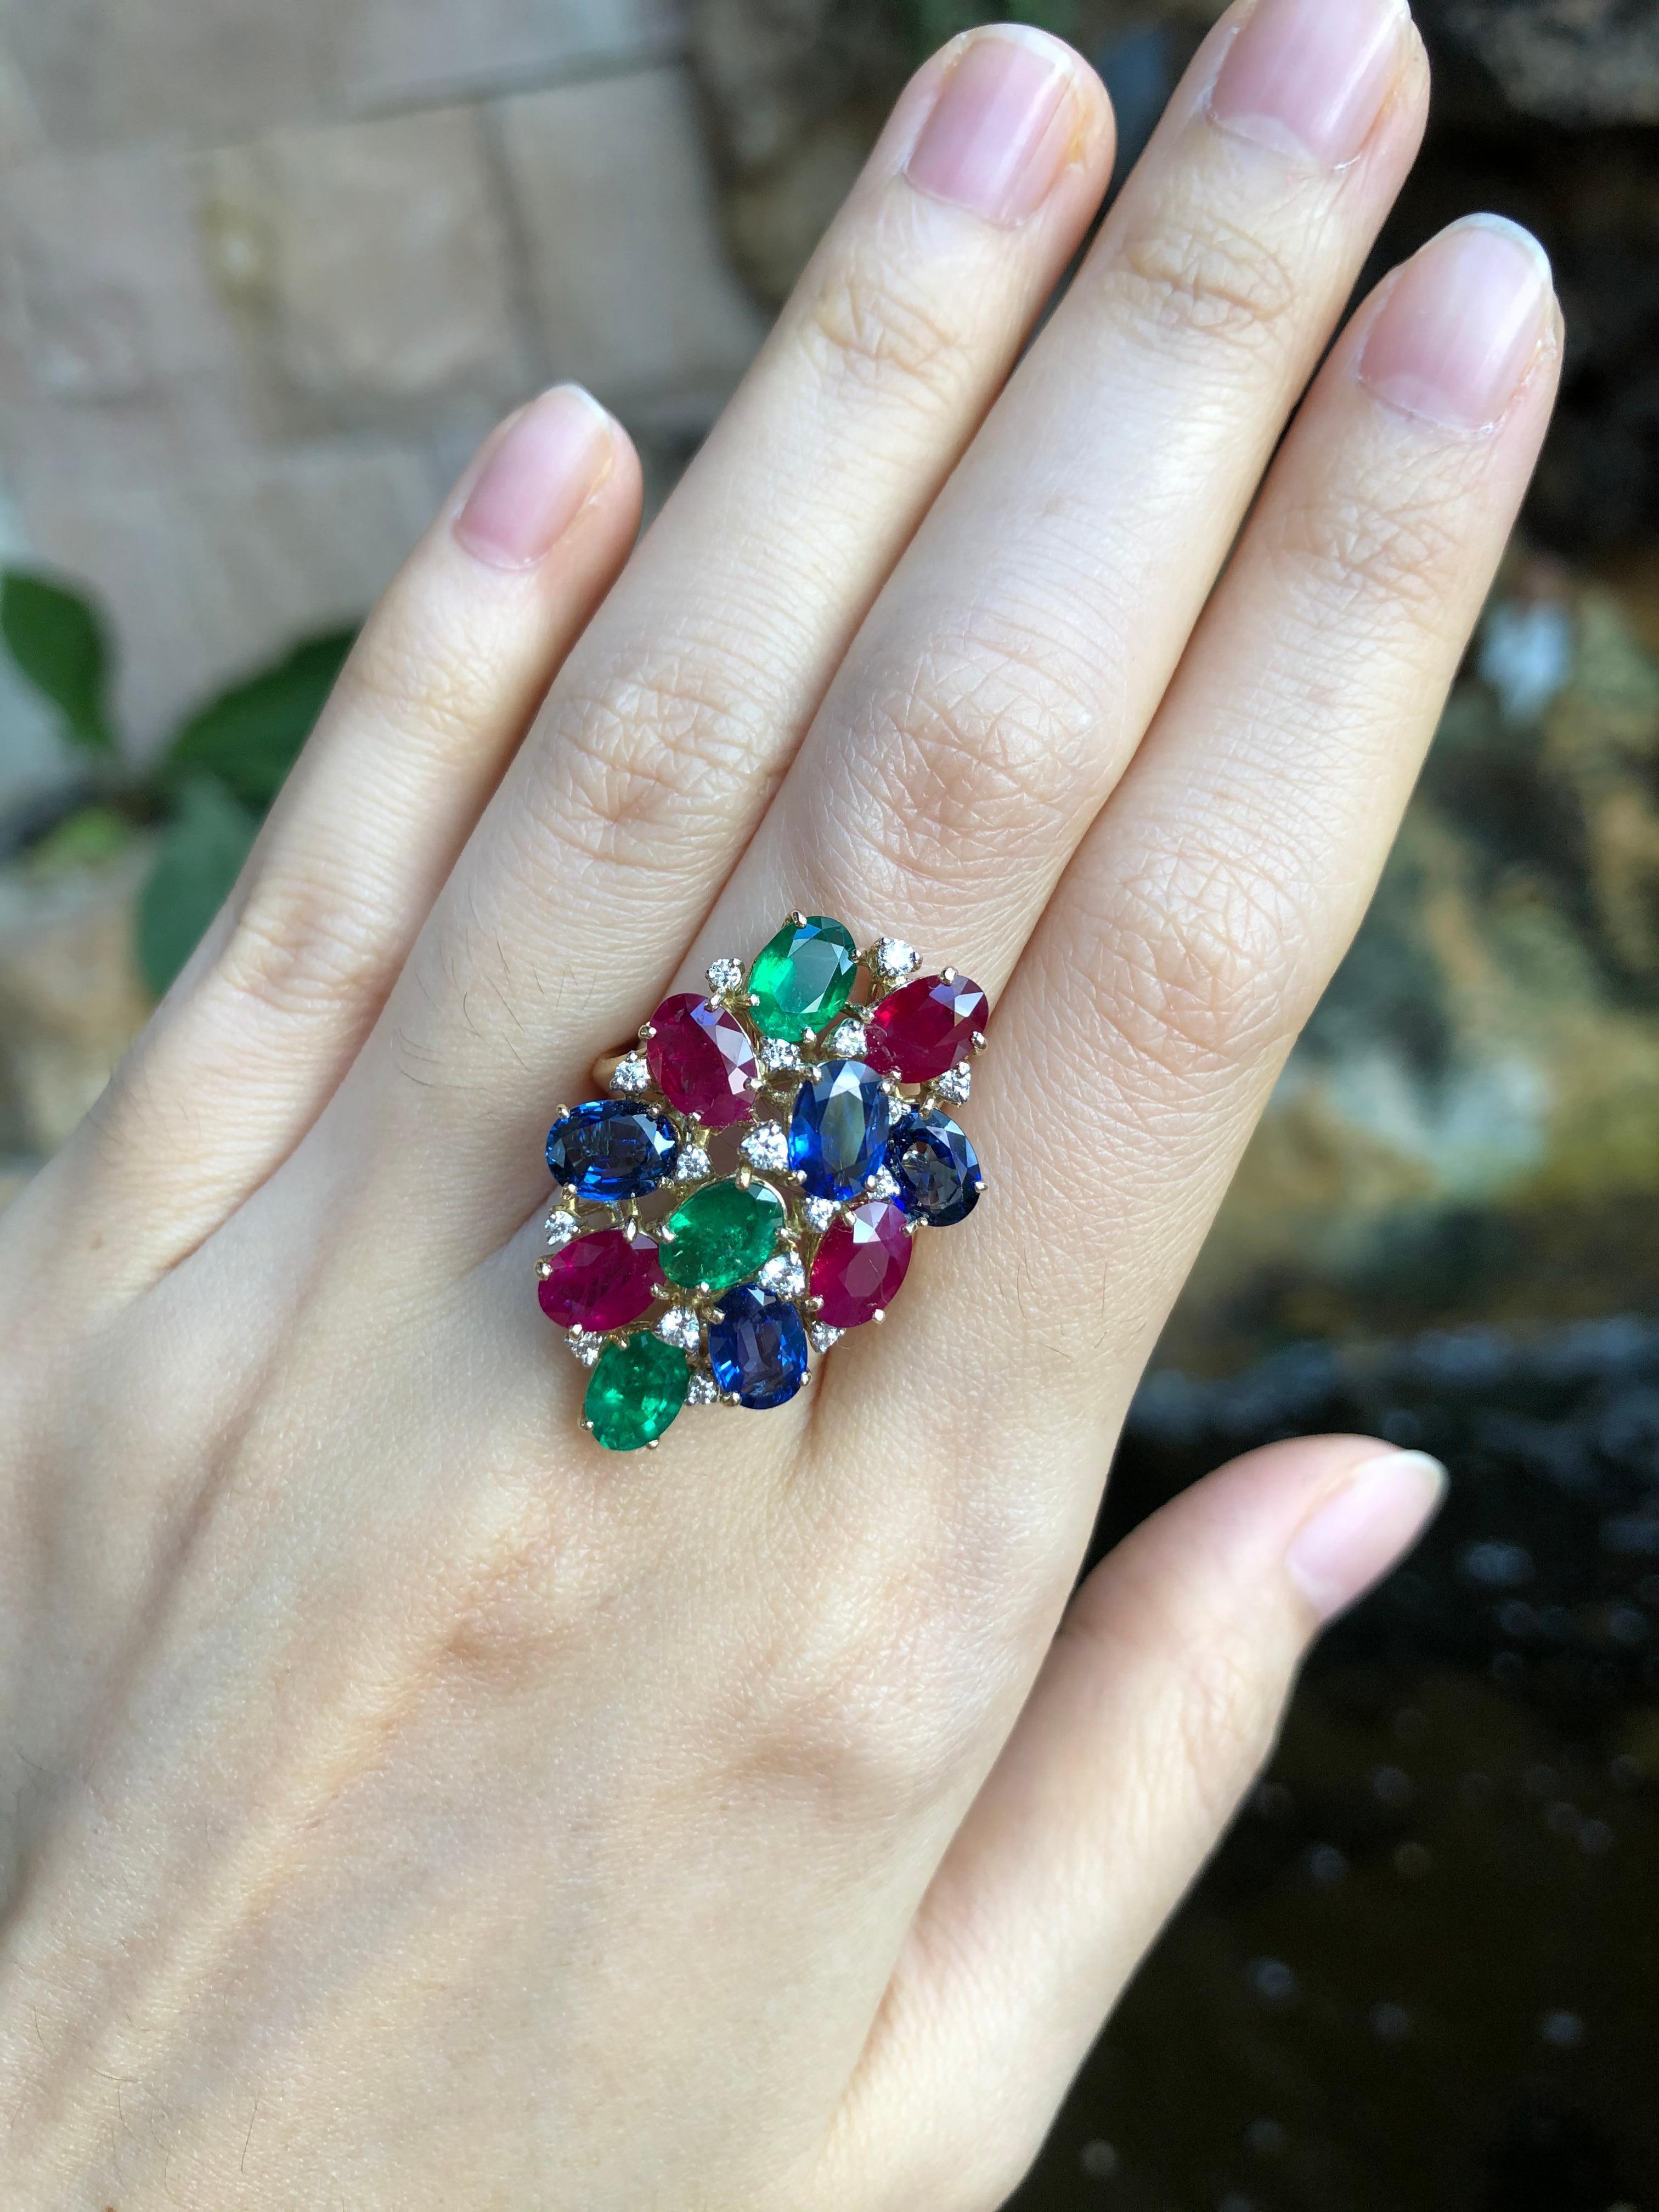 Blue Sapphire 3.74 carats, Ruby 3.05 carats, Emerald 1.67 carats with Diamond 0.26 carat Ring set in 18 Karat White Gold Settings

Width:  2.3 cm 
Length: 3.1 cm
Ring Size: 53
Total Weight: 9.18 grams

